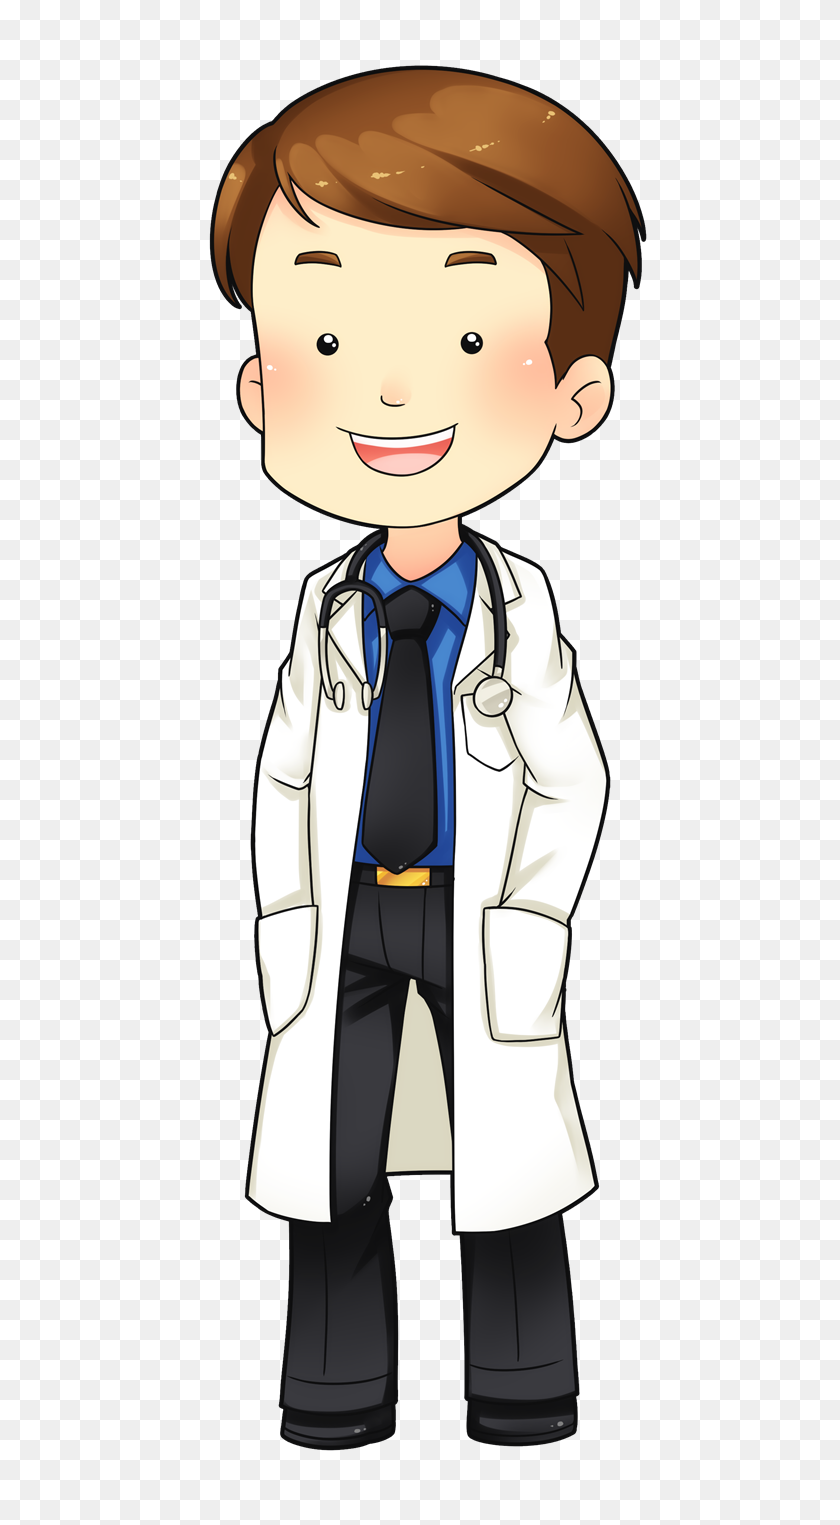 700x1465 Doctor Images Clip Art Look At Doctor Images Clip Art Clip Art - Project Clipart